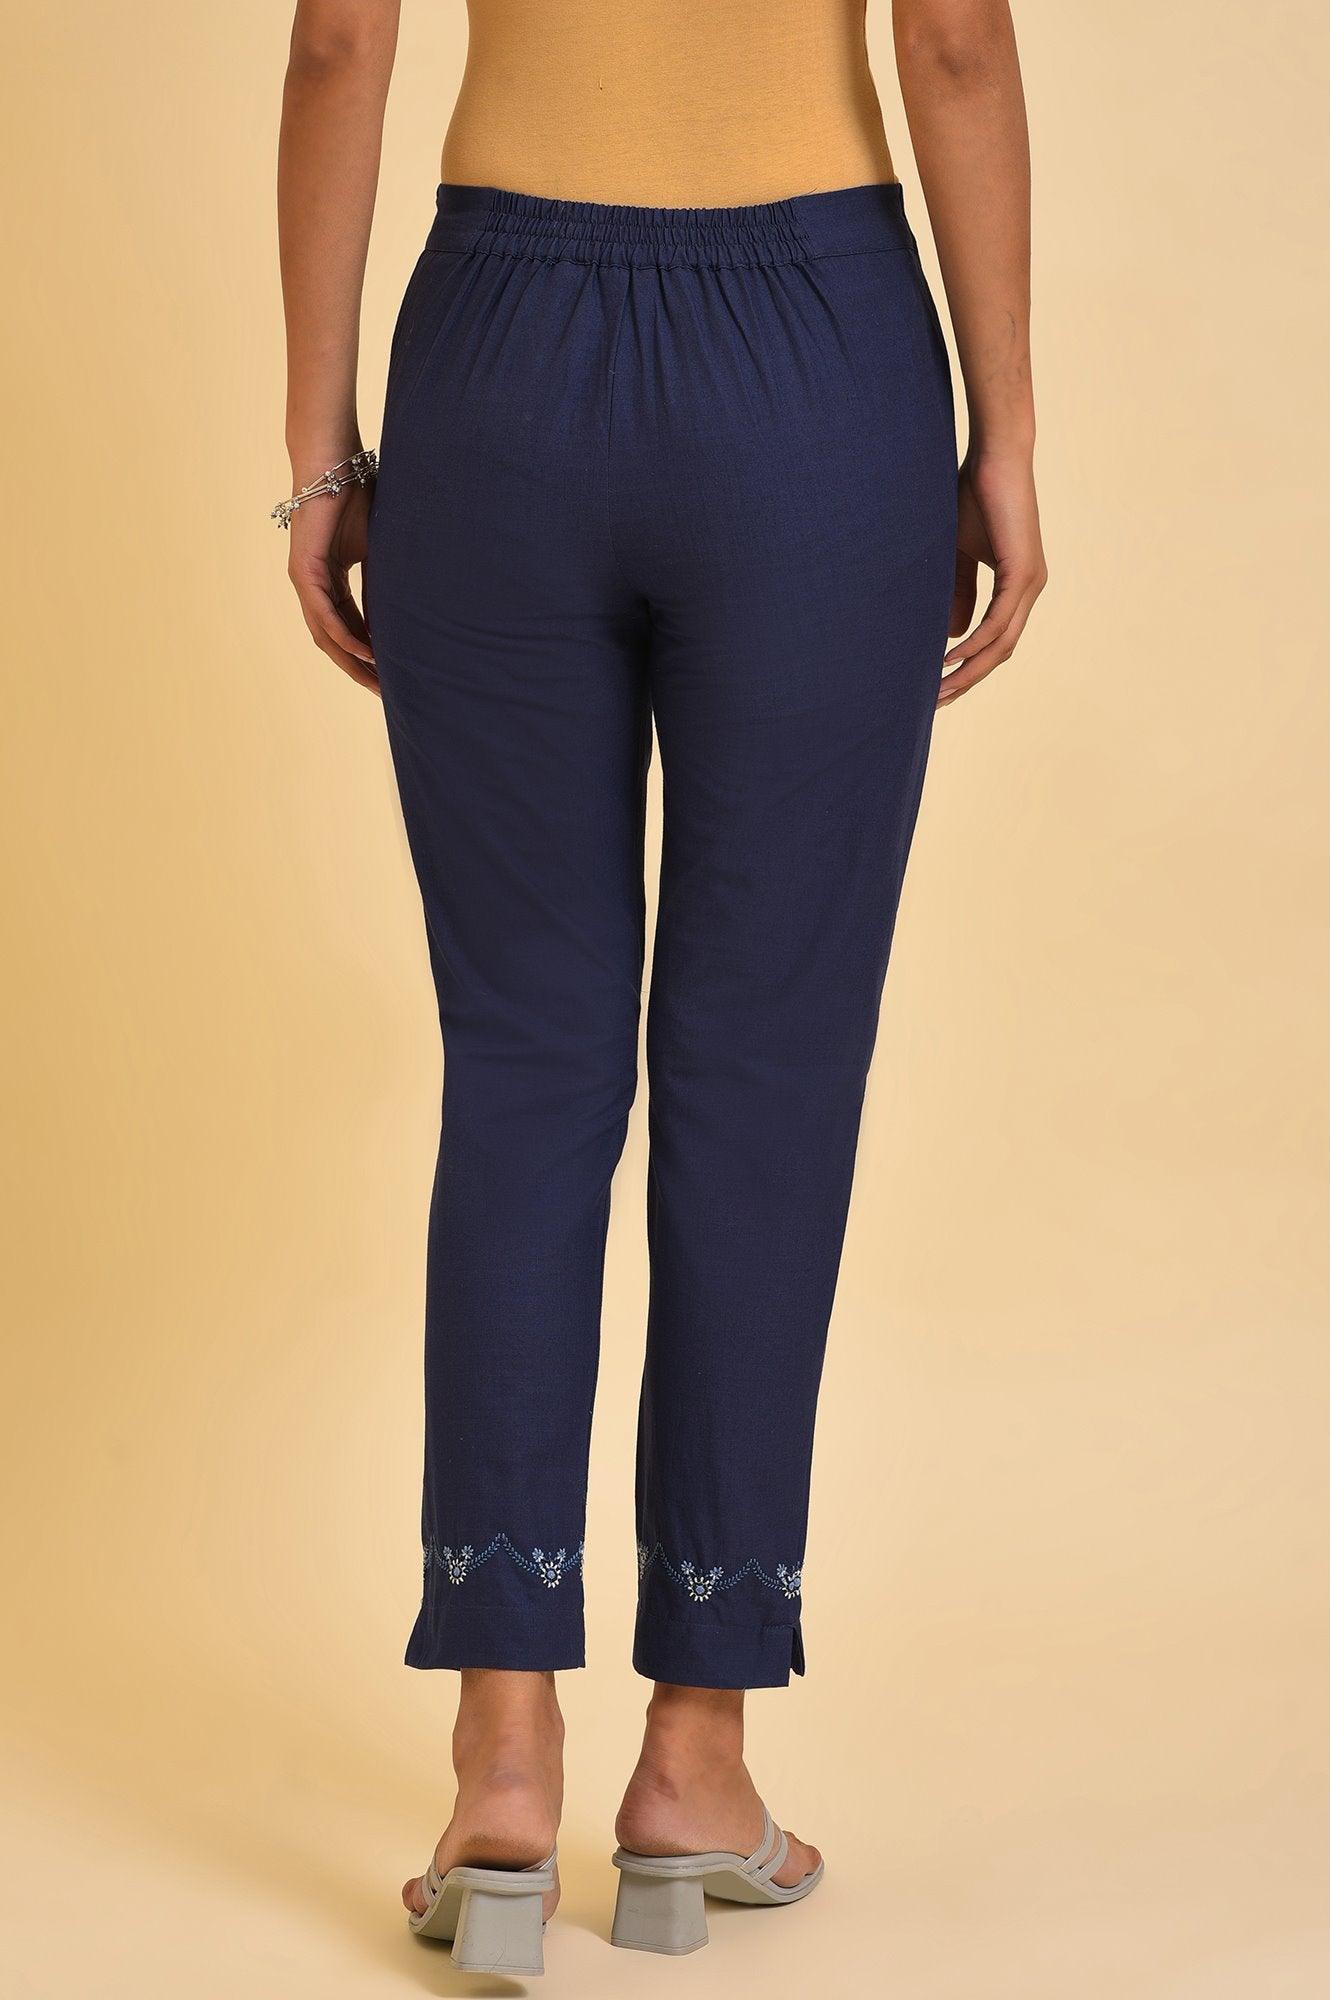 Navy Blue Cotton Slim Pants With Embroidered Hem - wforwoman